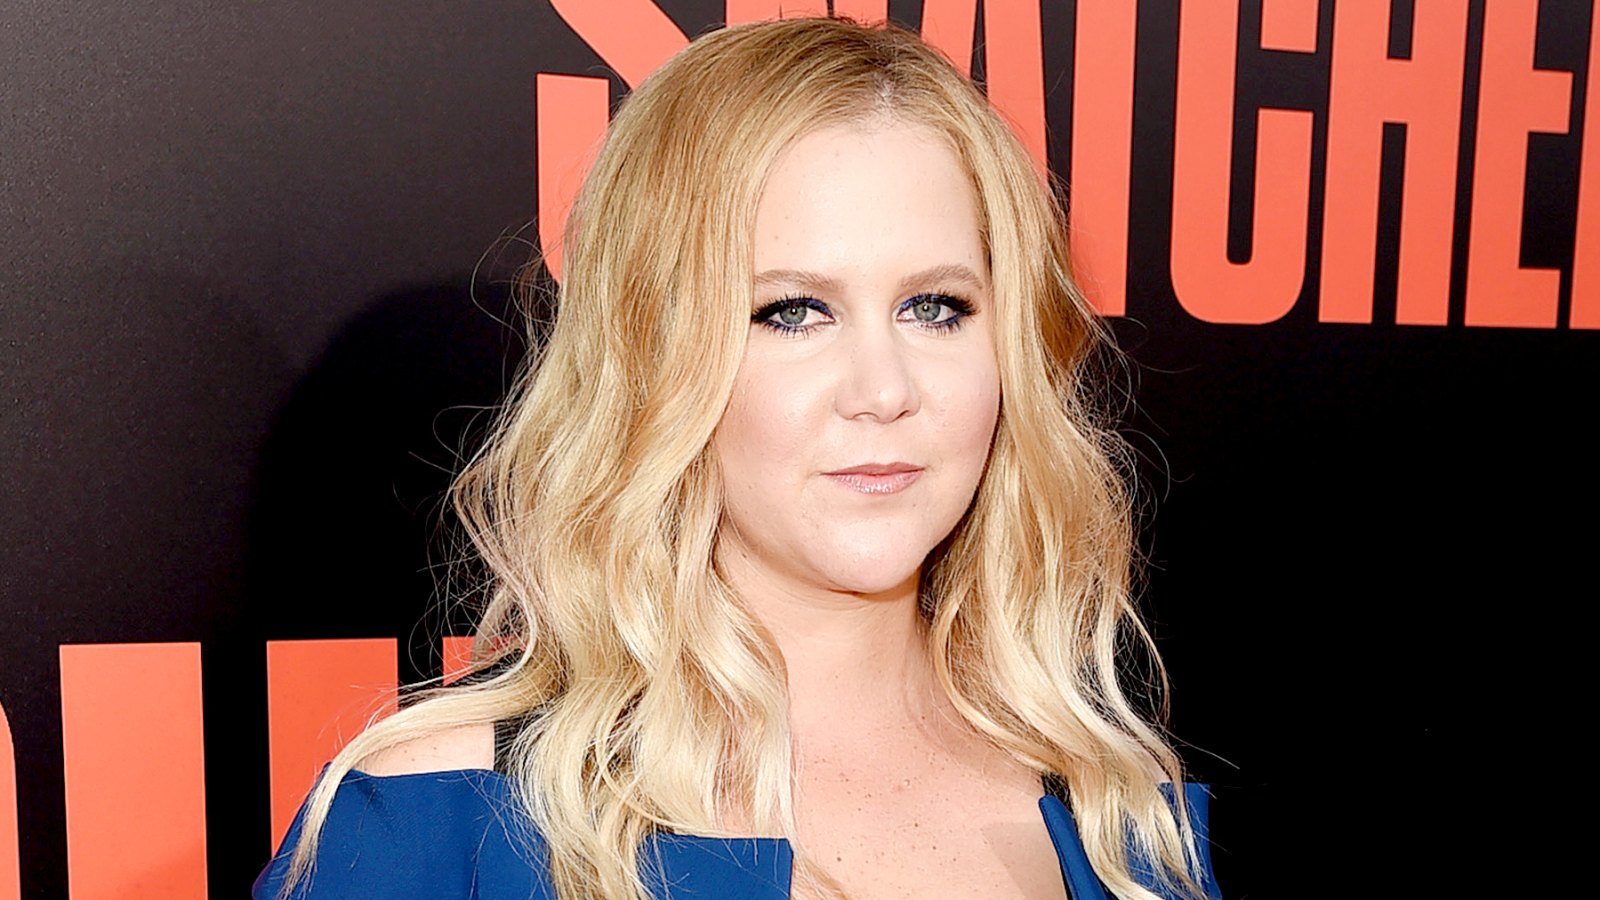 Amy Schumer arrives at the premiere of 20th Century Fox's "Snatched" at the Village Theatre on May 10, 2017 in Los Angeles, California.